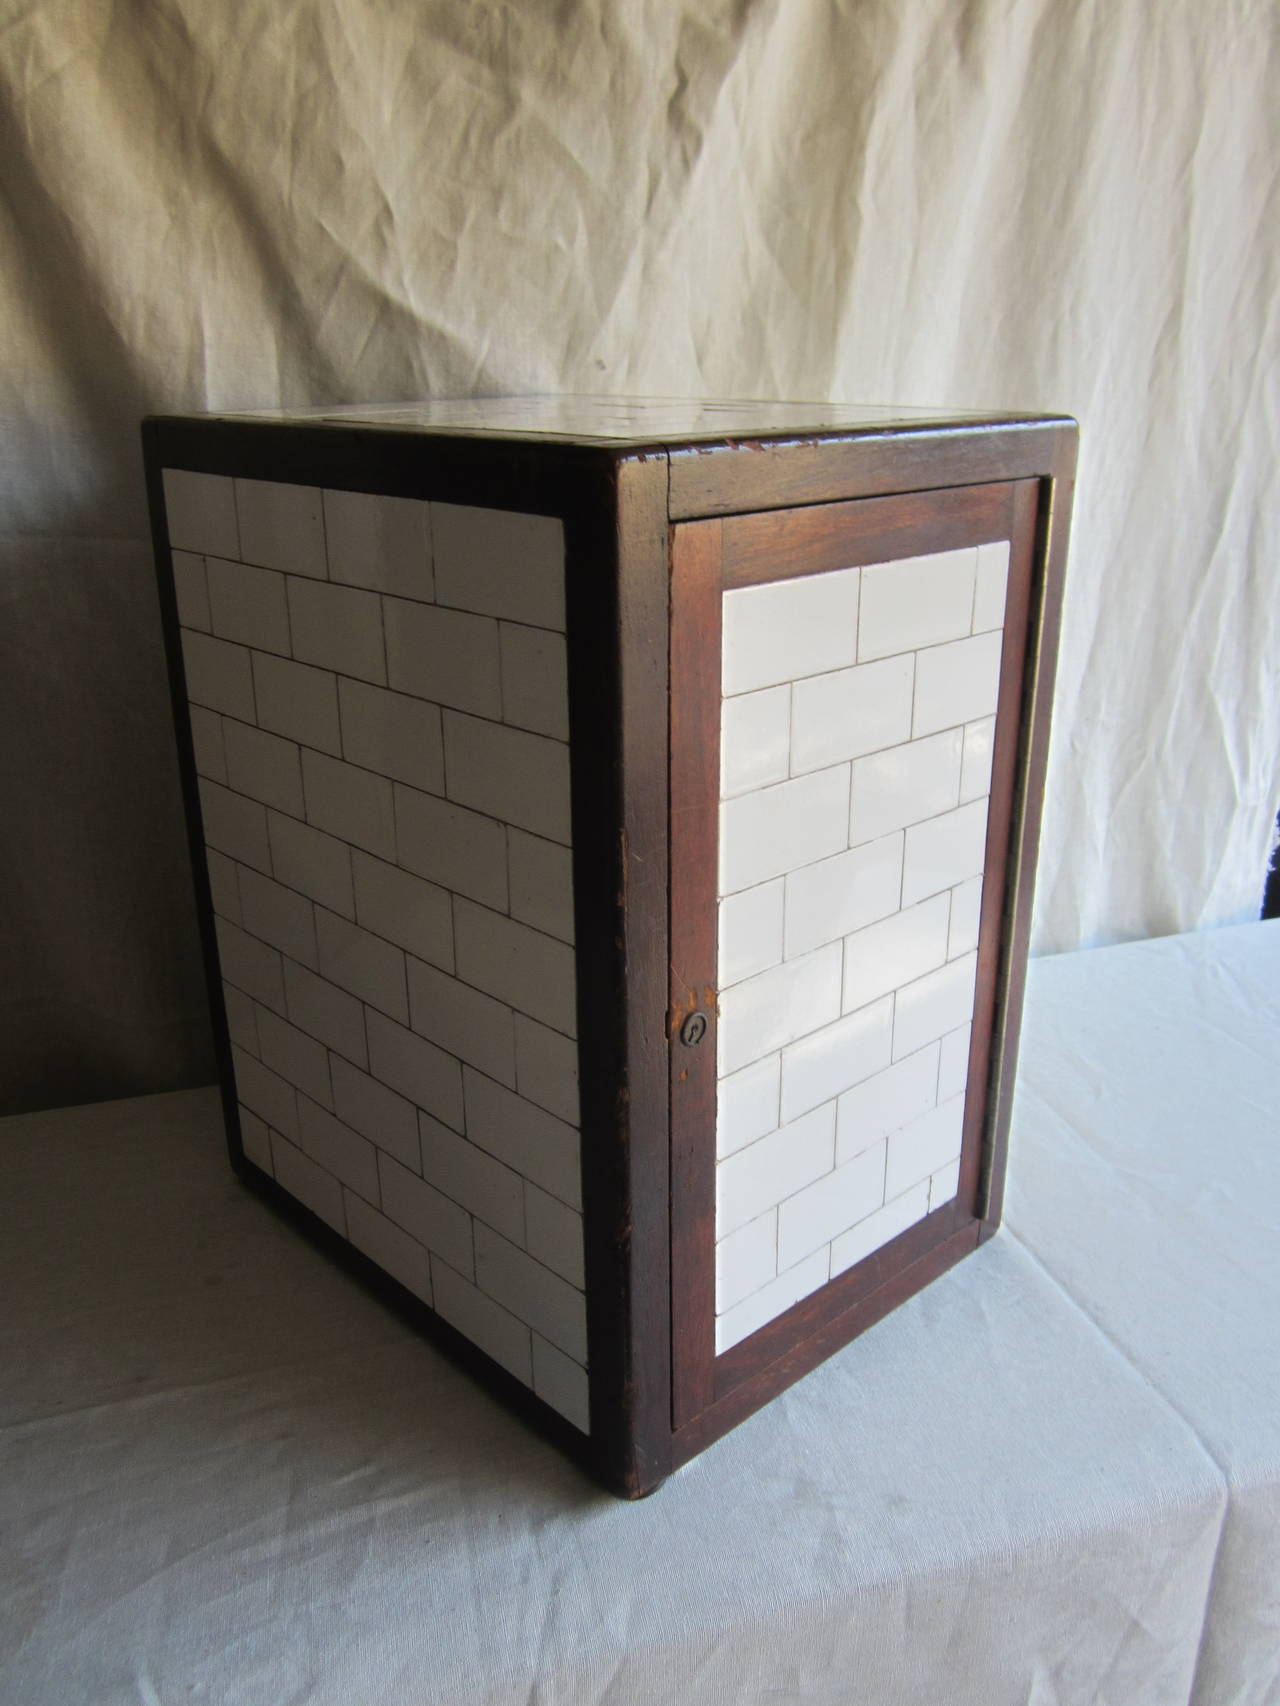 Wood framed porcelain faced humidor with milk glass lined interior with a glass shelf. There is no key.